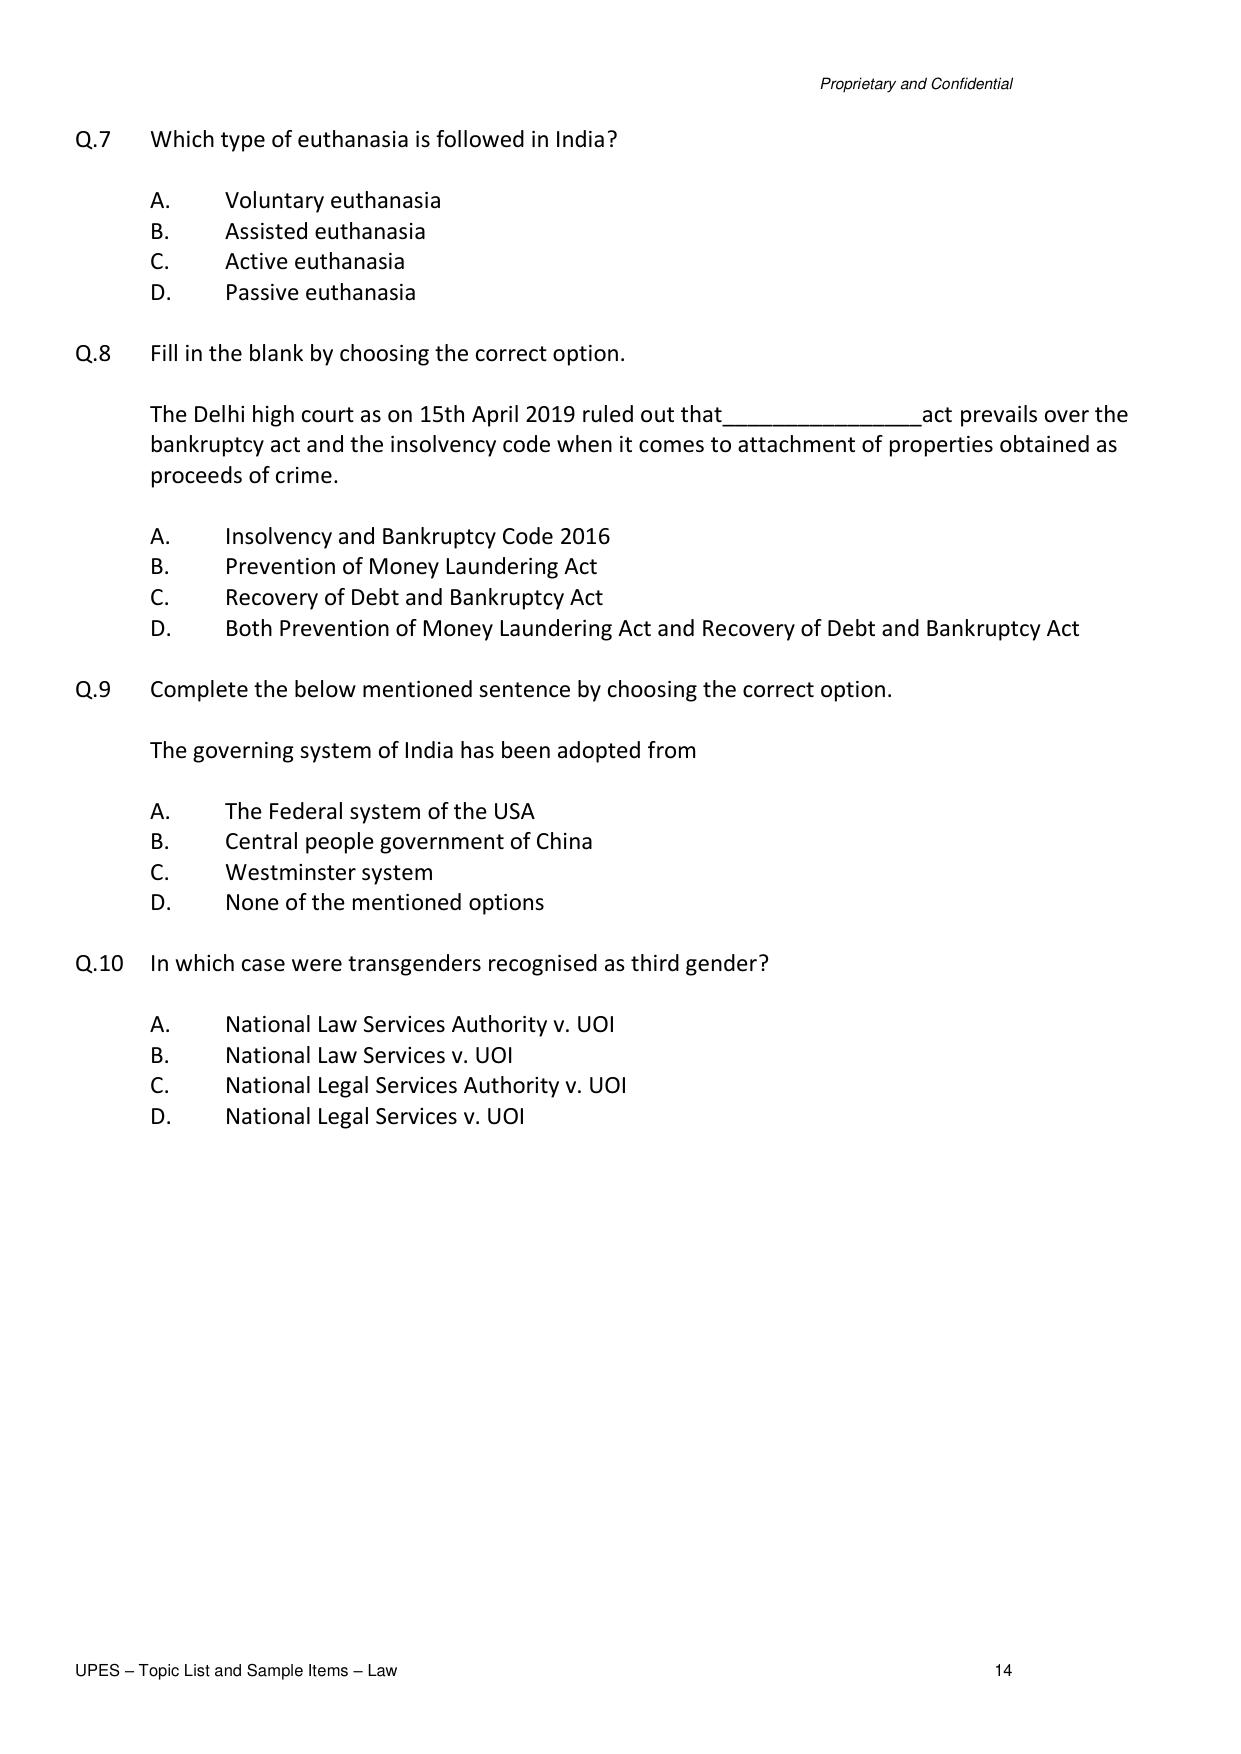 UPES Law Sample Papers - Page 14